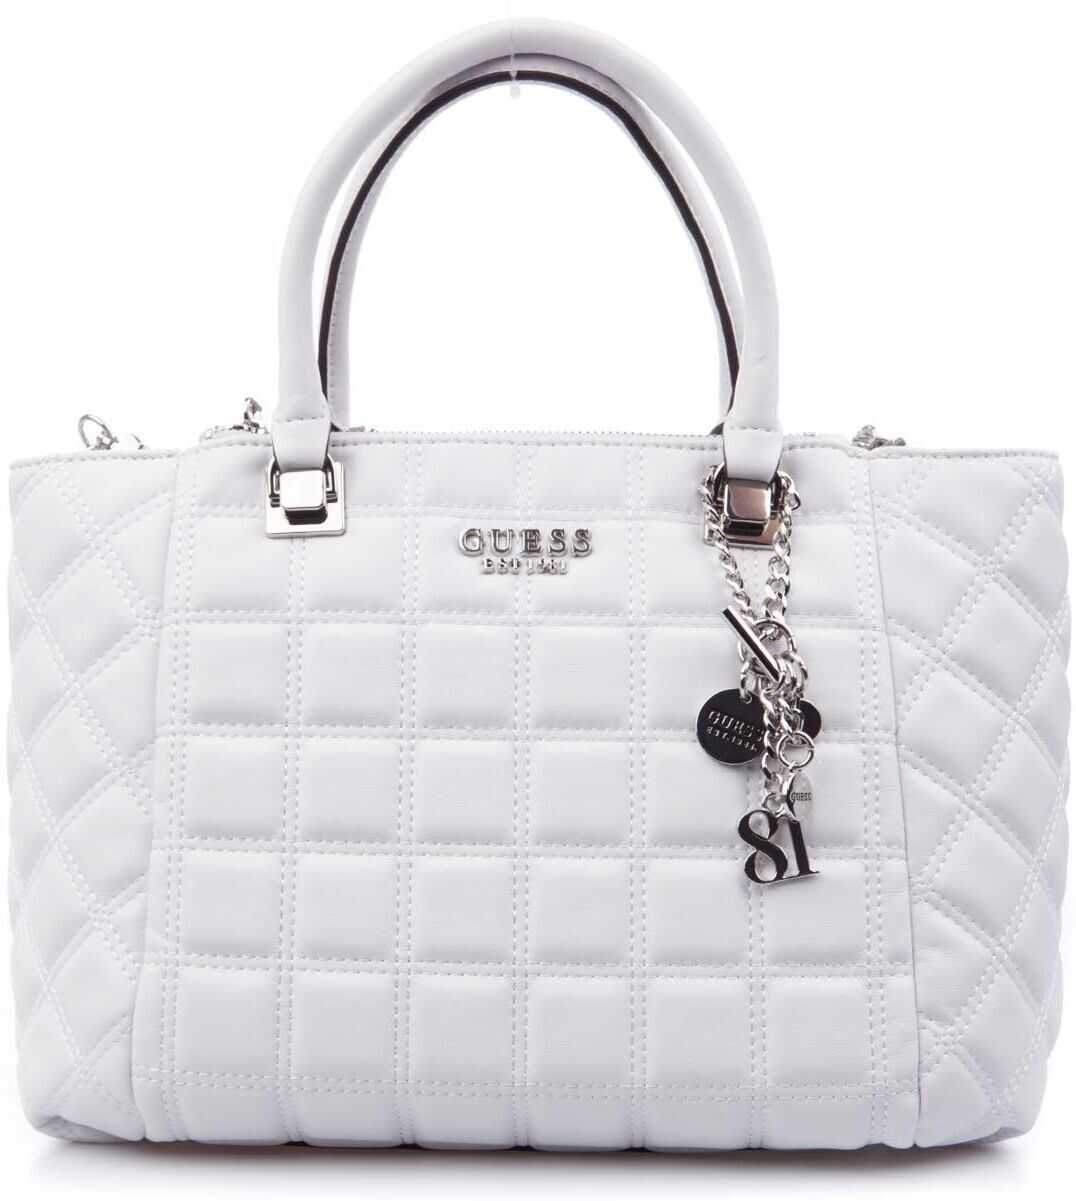 GUESS Handbag "Kamina" in quilted faux leather White